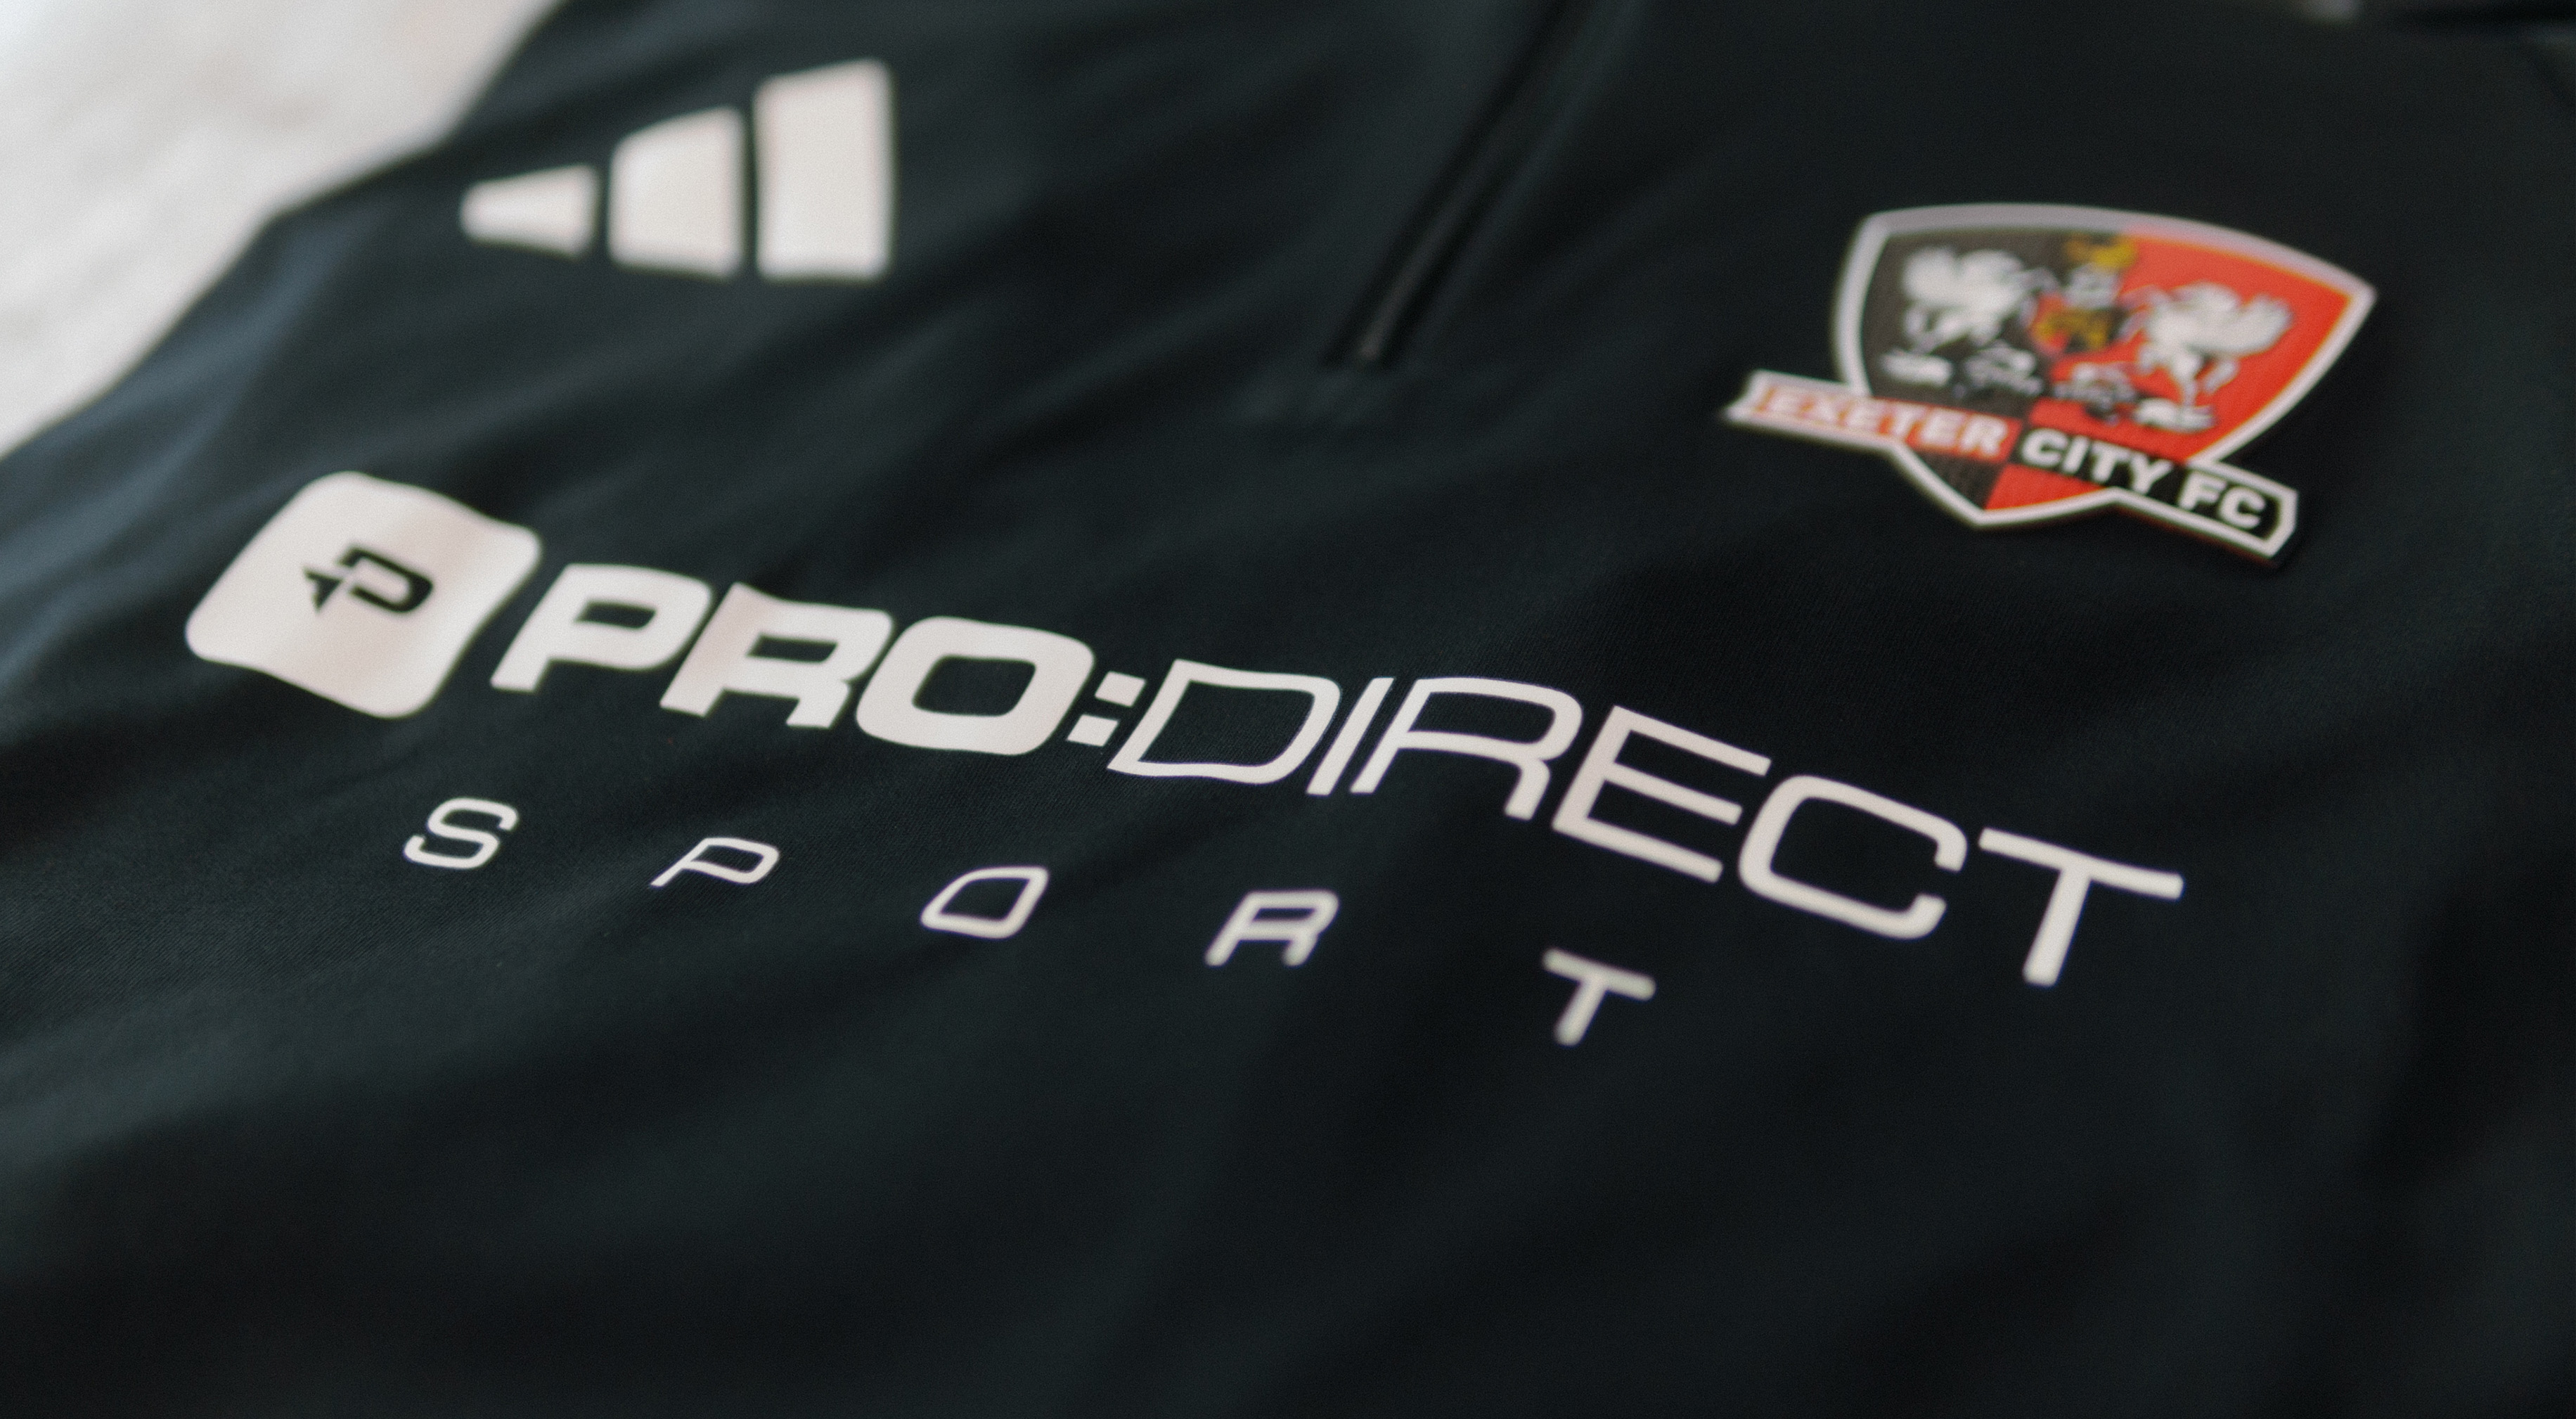 The image shows the Pro:Direct logo on an Exeter City training top